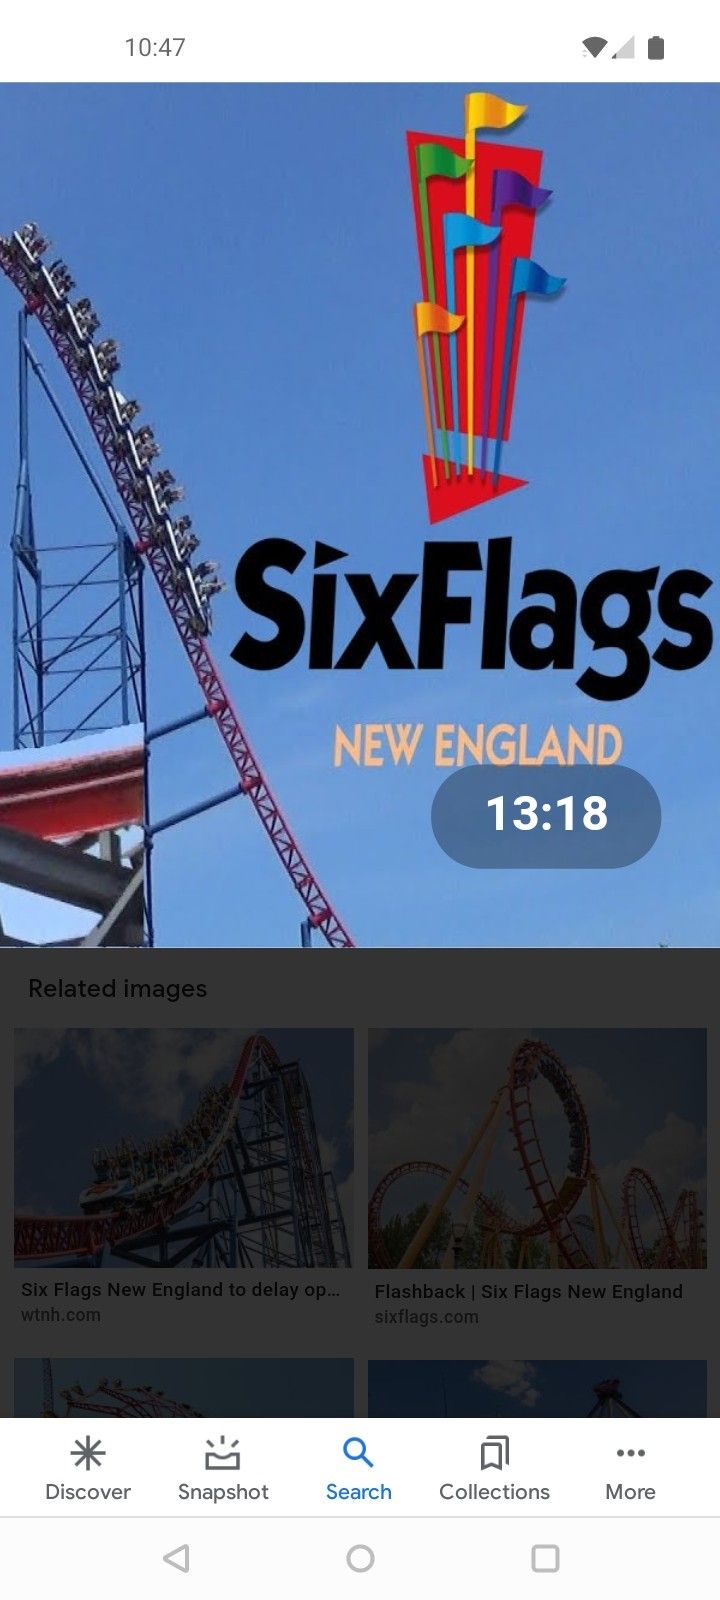 I Have 4 Tickets From Six Flags New England From This Year Into Next Year 1 Ticket For $20 Or 4 Of Them For $80